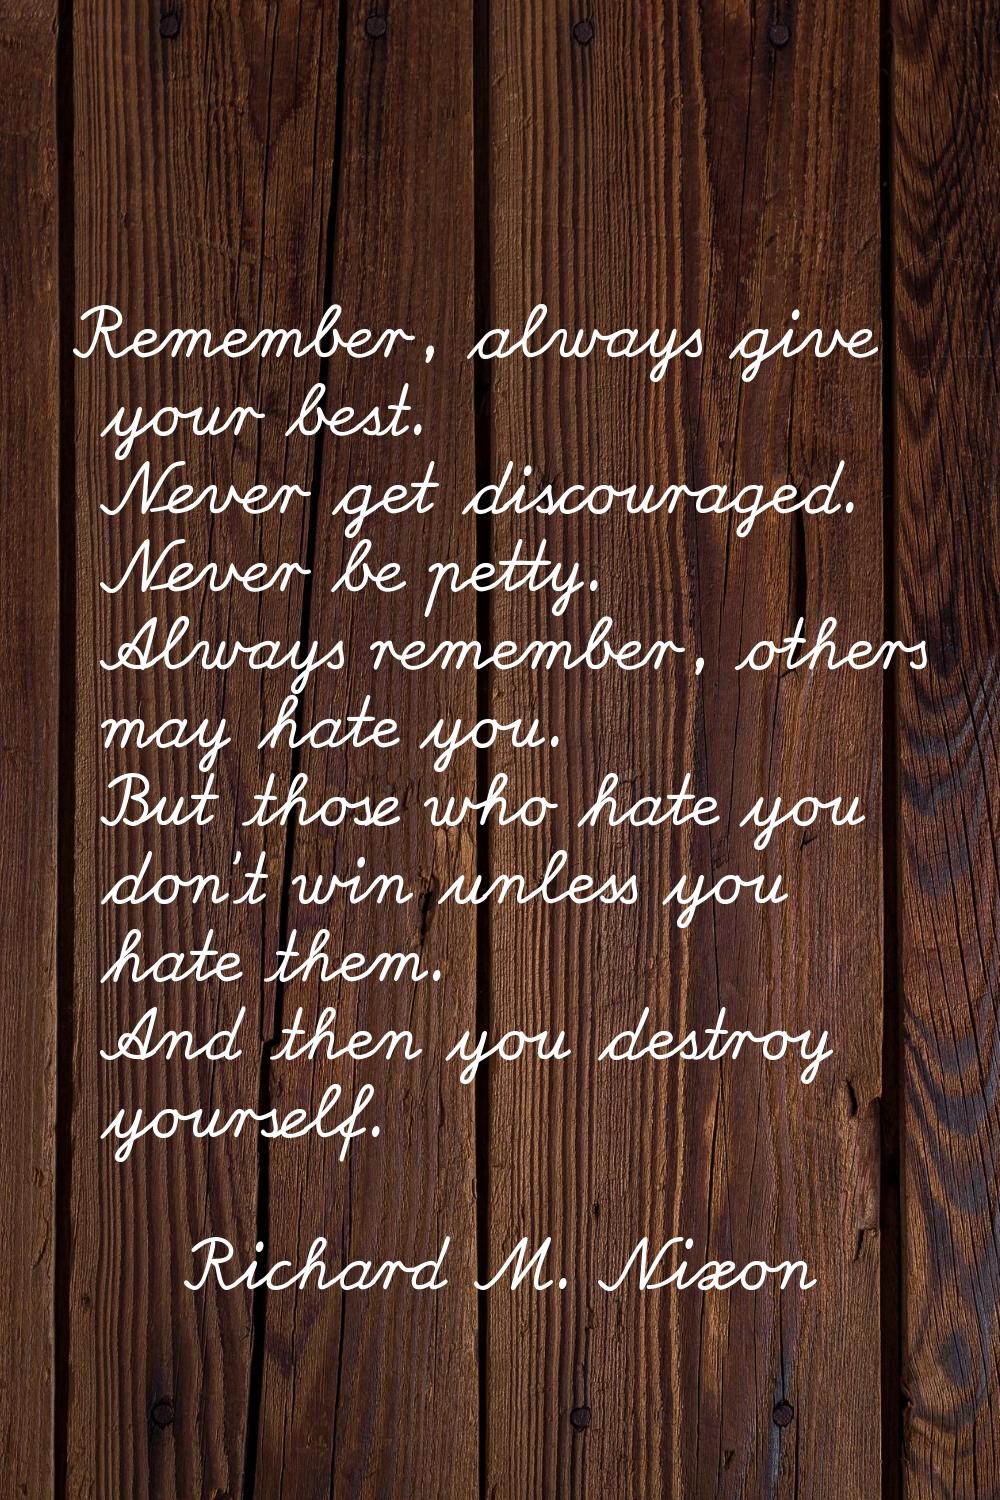 Remember, always give your best. Never get discouraged. Never be petty. Always remember, others may